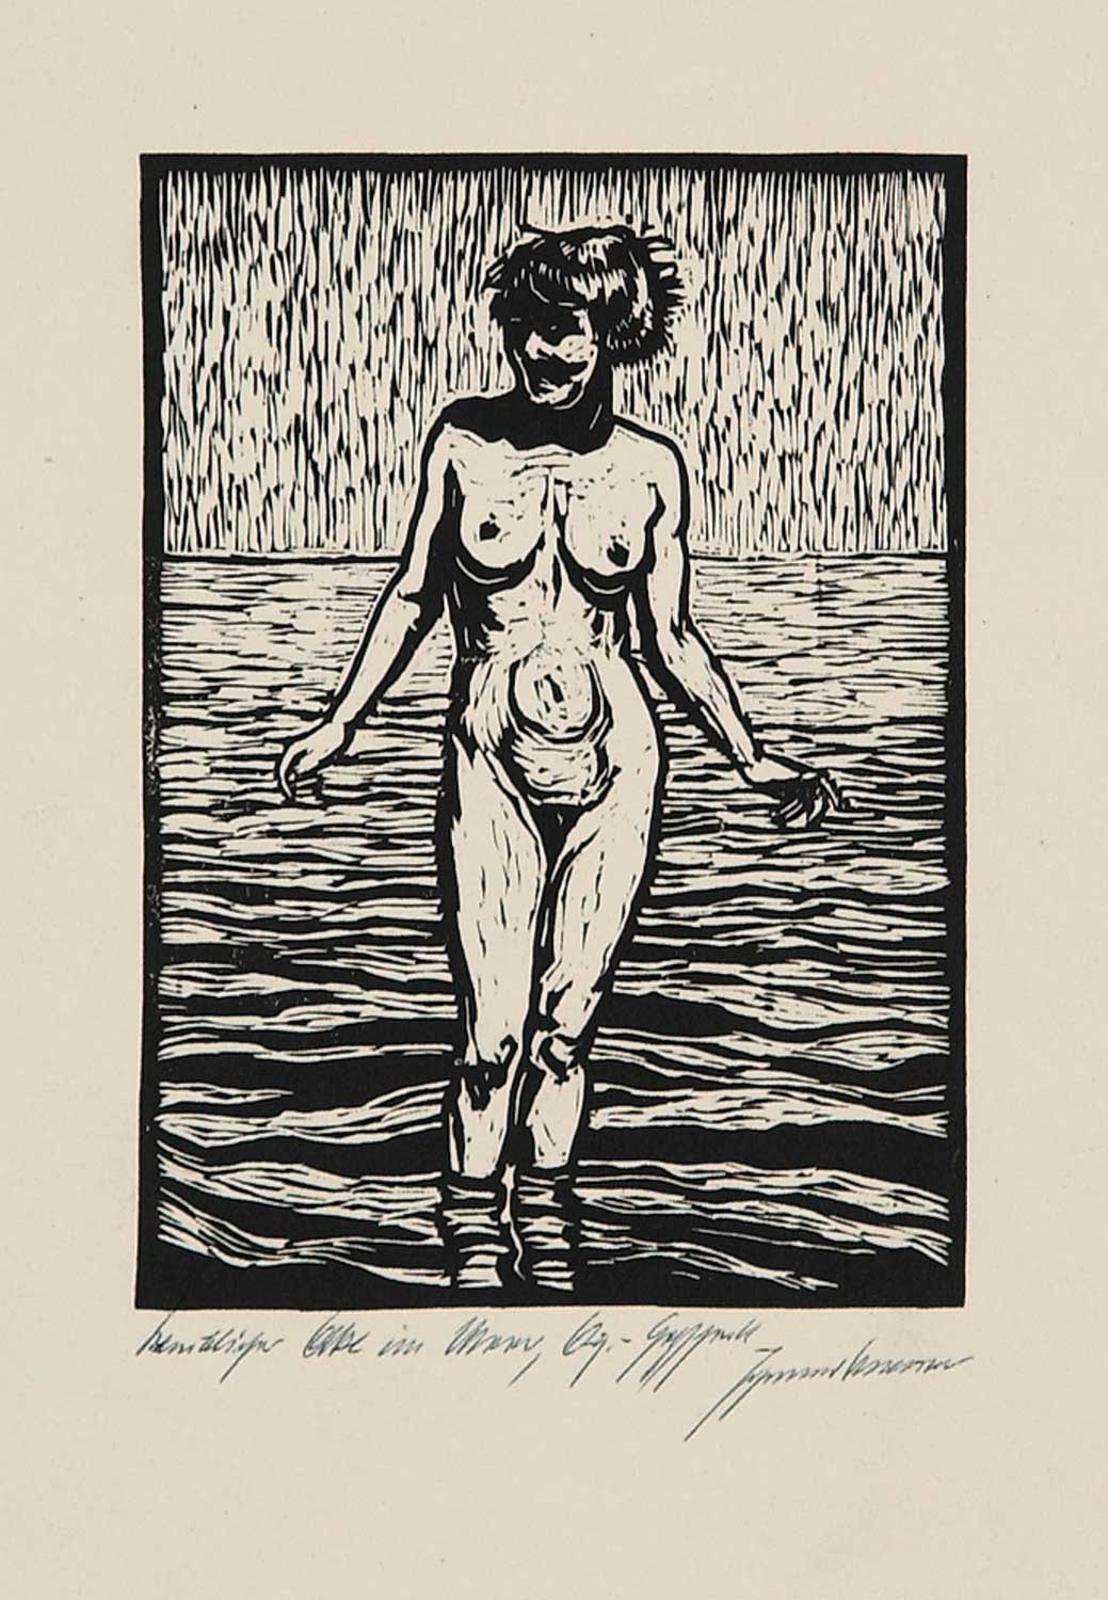 Johannes Brauer - Untitled - Skinny Dipping